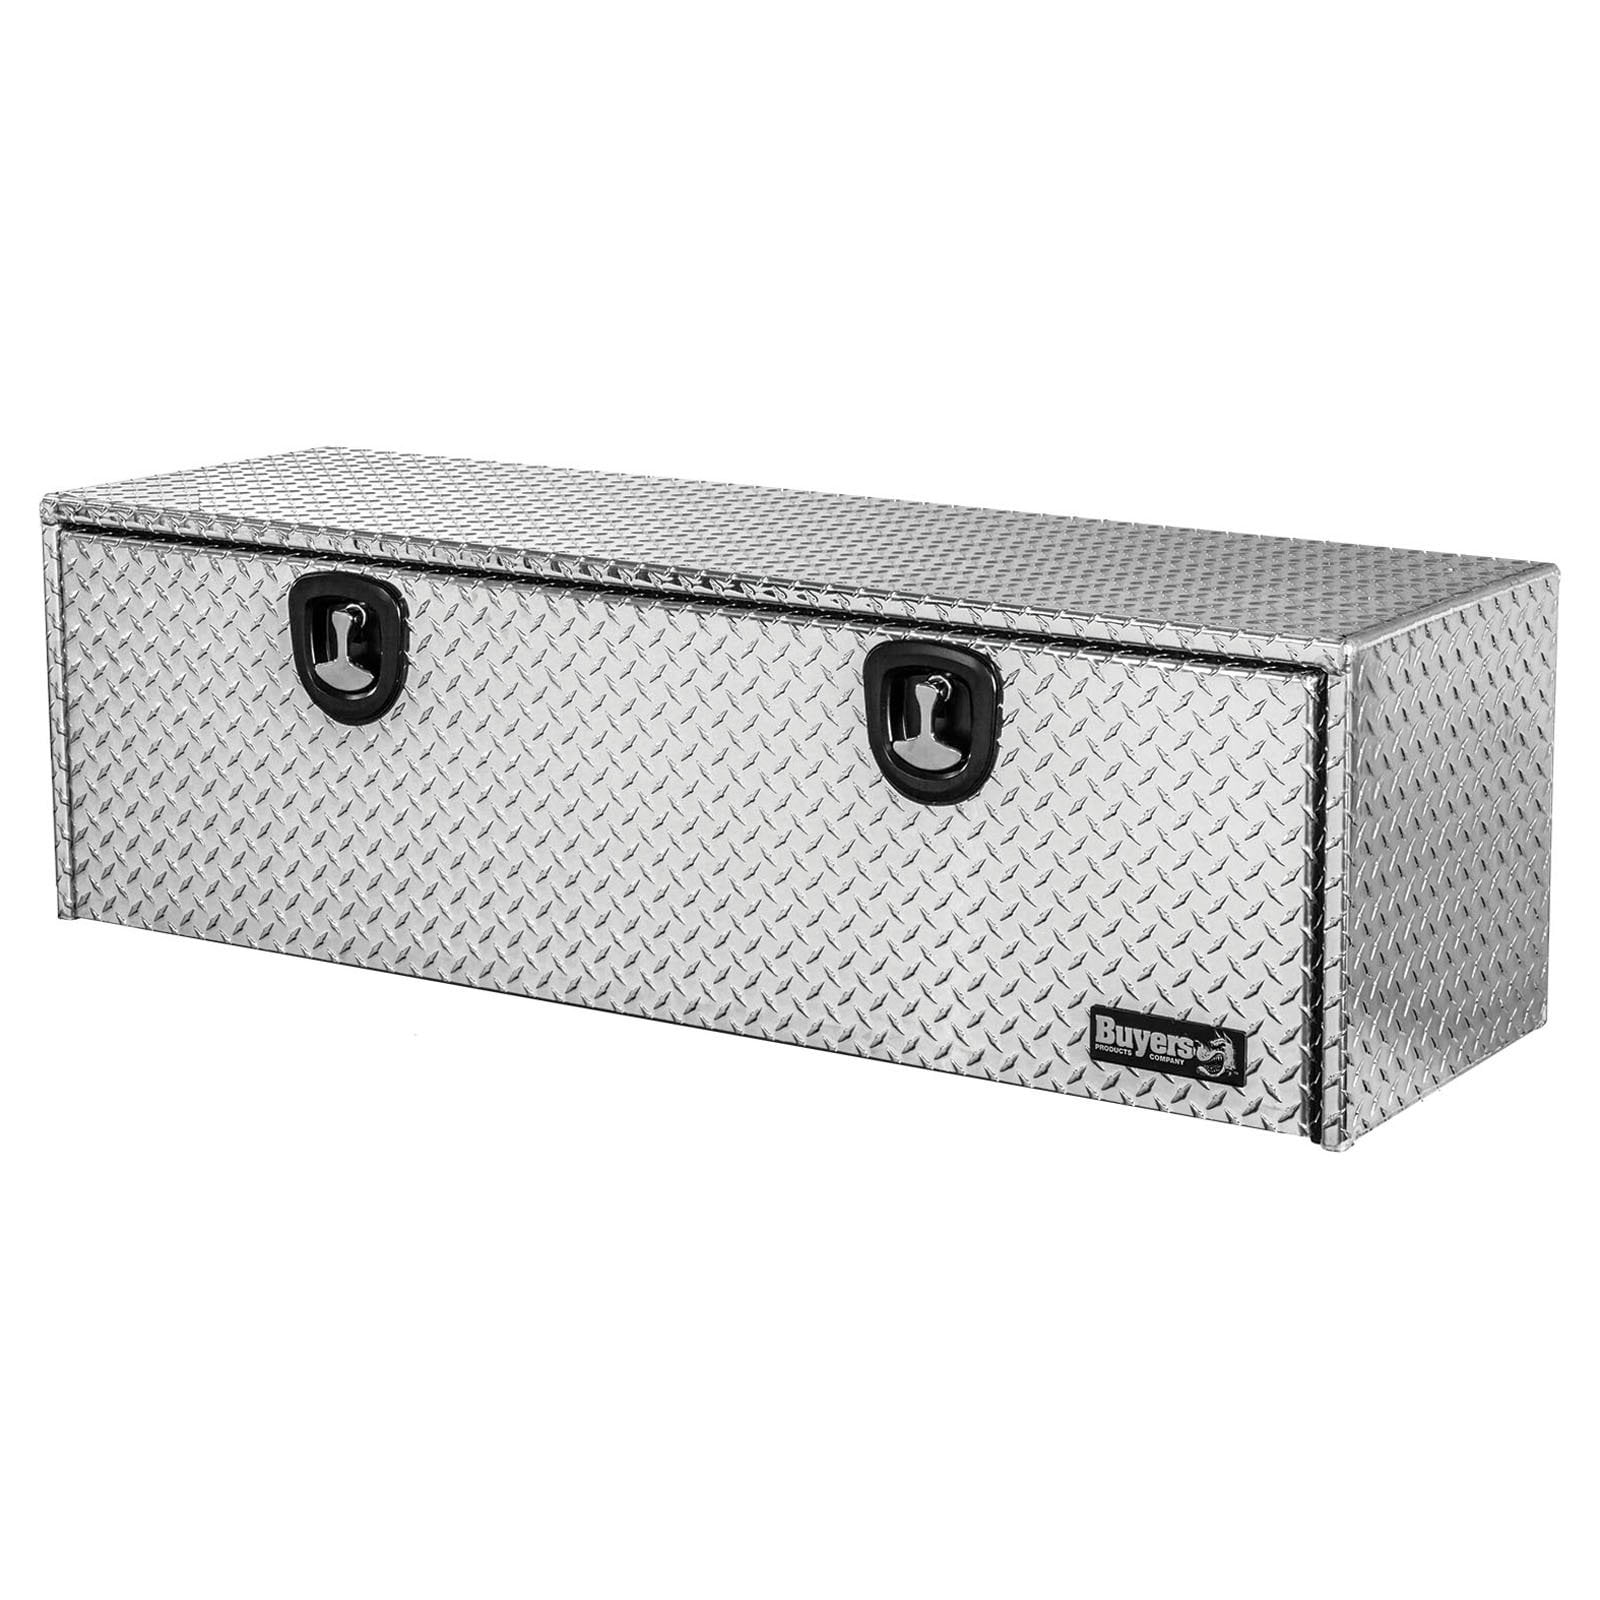 ToolTex Tool Box Liners Made from Recycled Materials in the USA